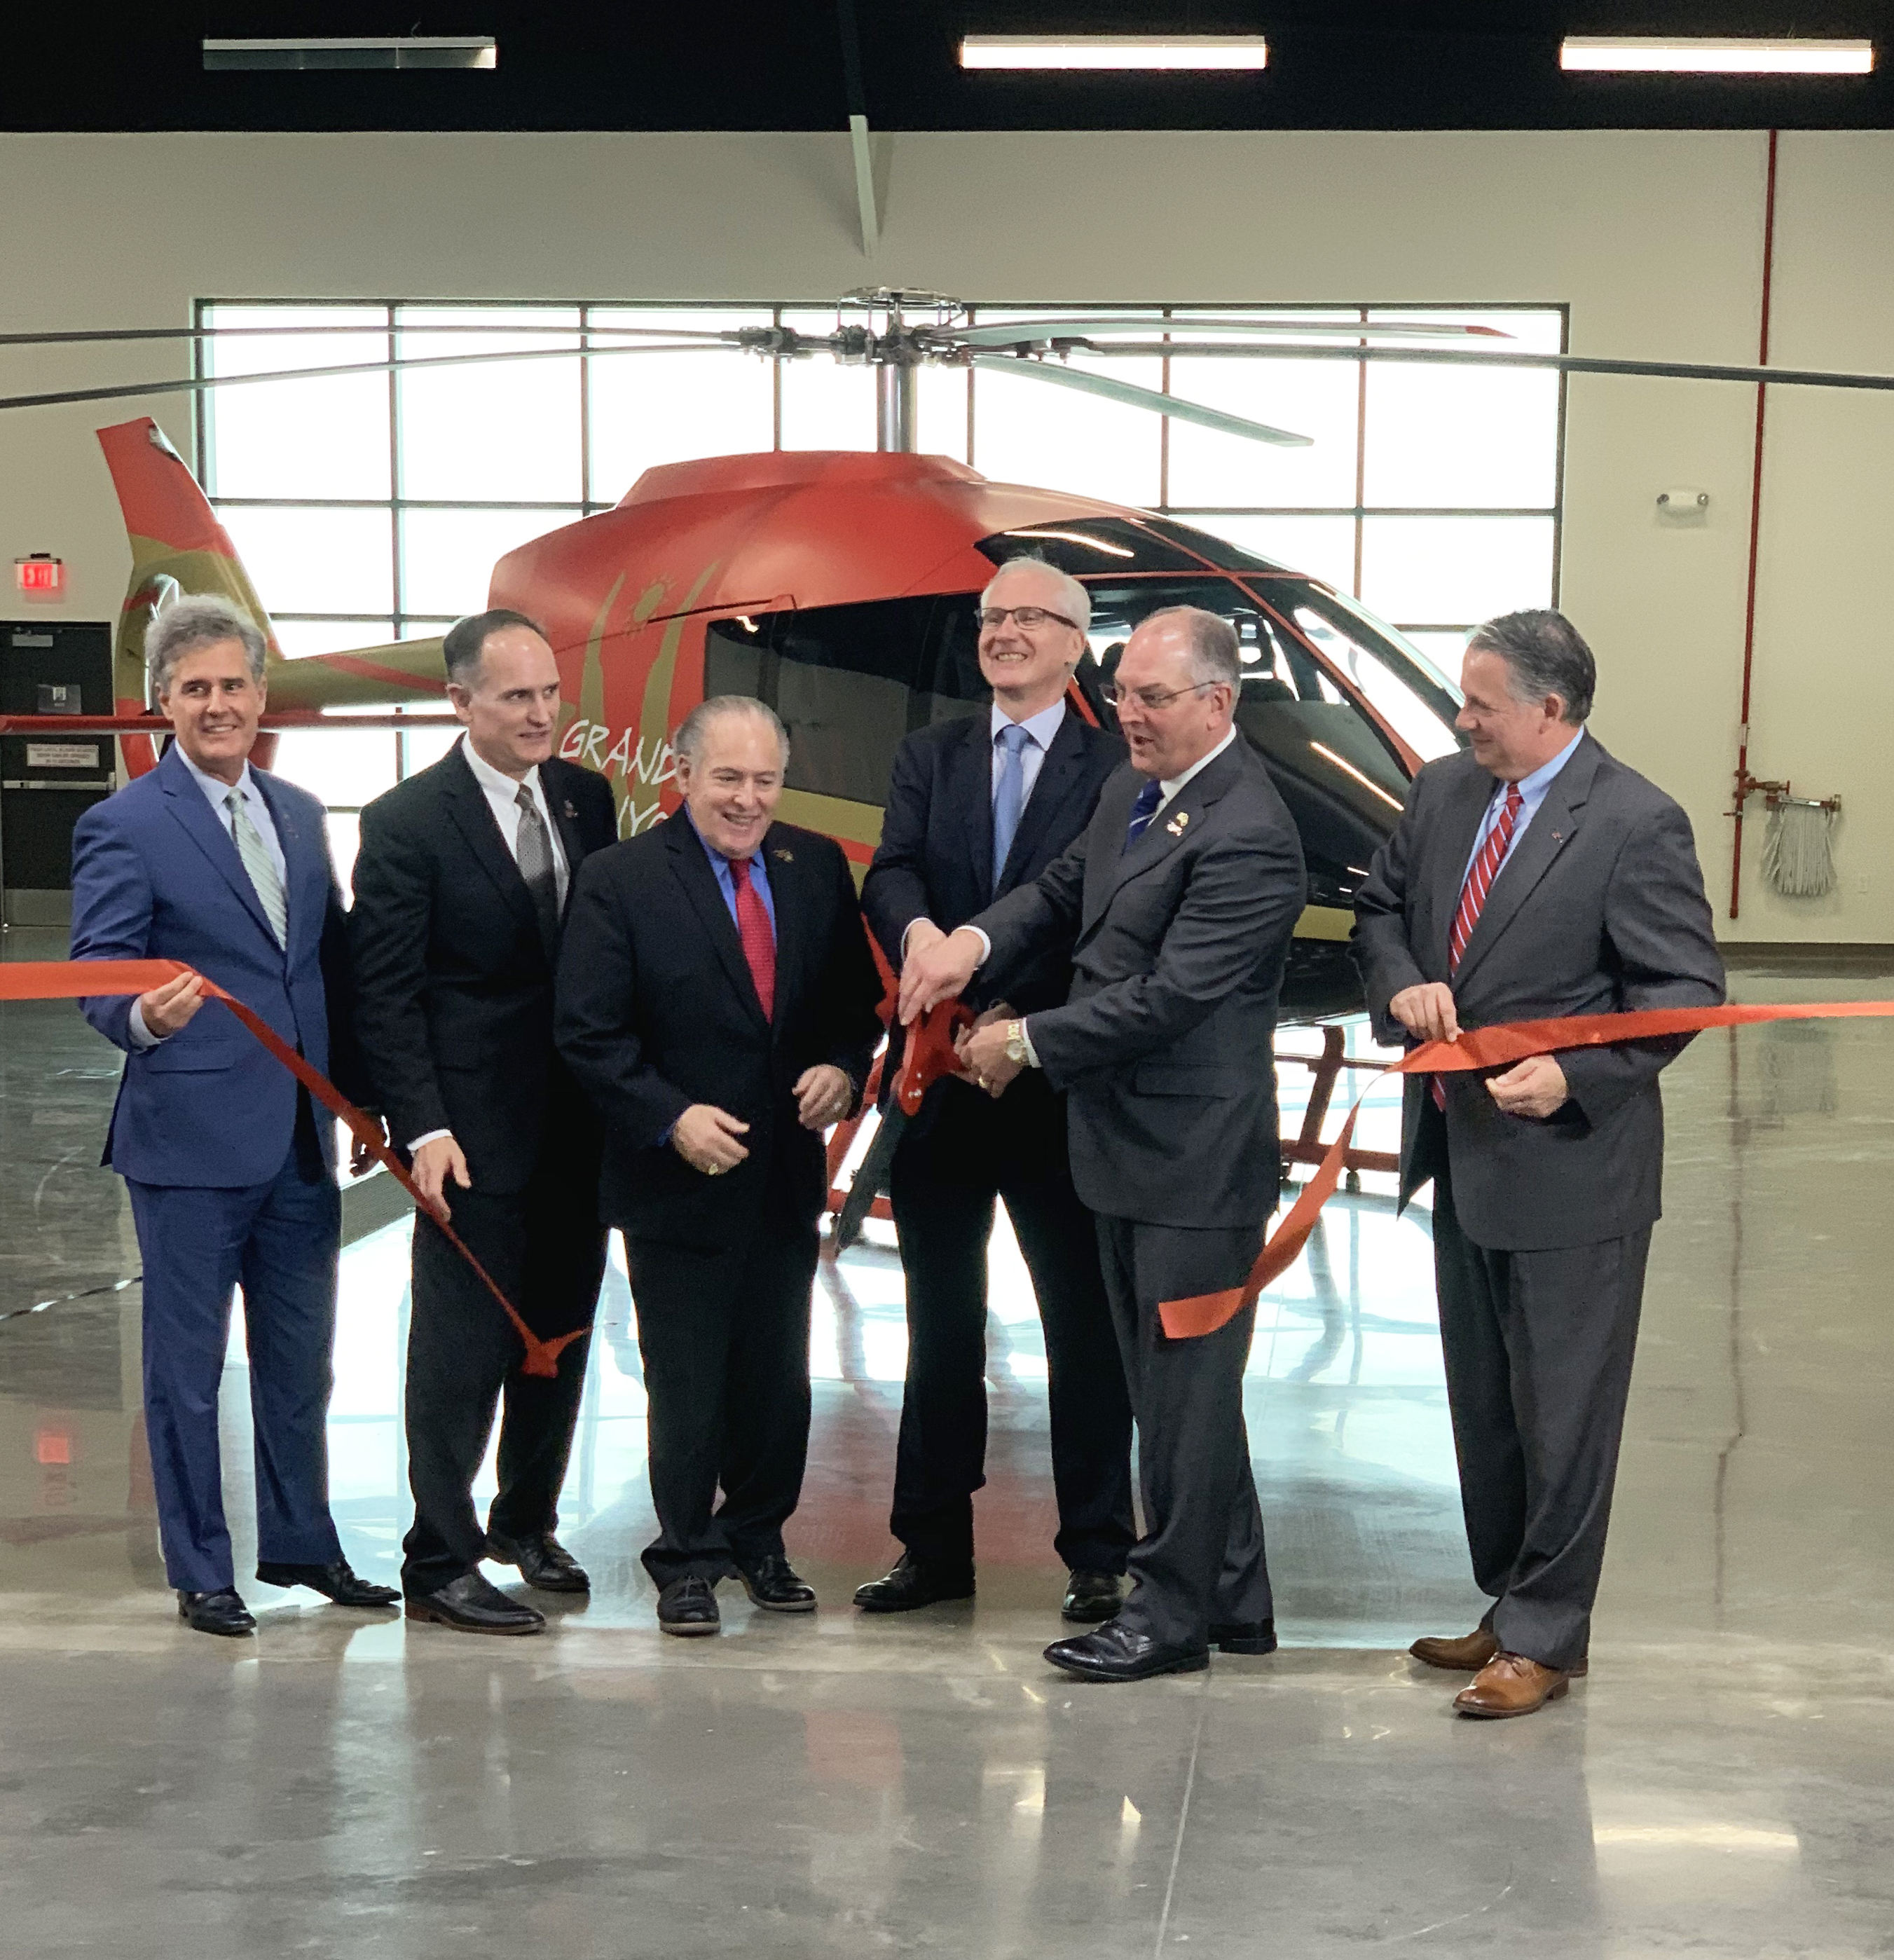 Louisiana Gov. John Bel Edwards and Kopter CEO Andreas Löwenstein cut the ribbon in the manufacturer's new facility in Lafayette, Louisiana. Kopter Photo